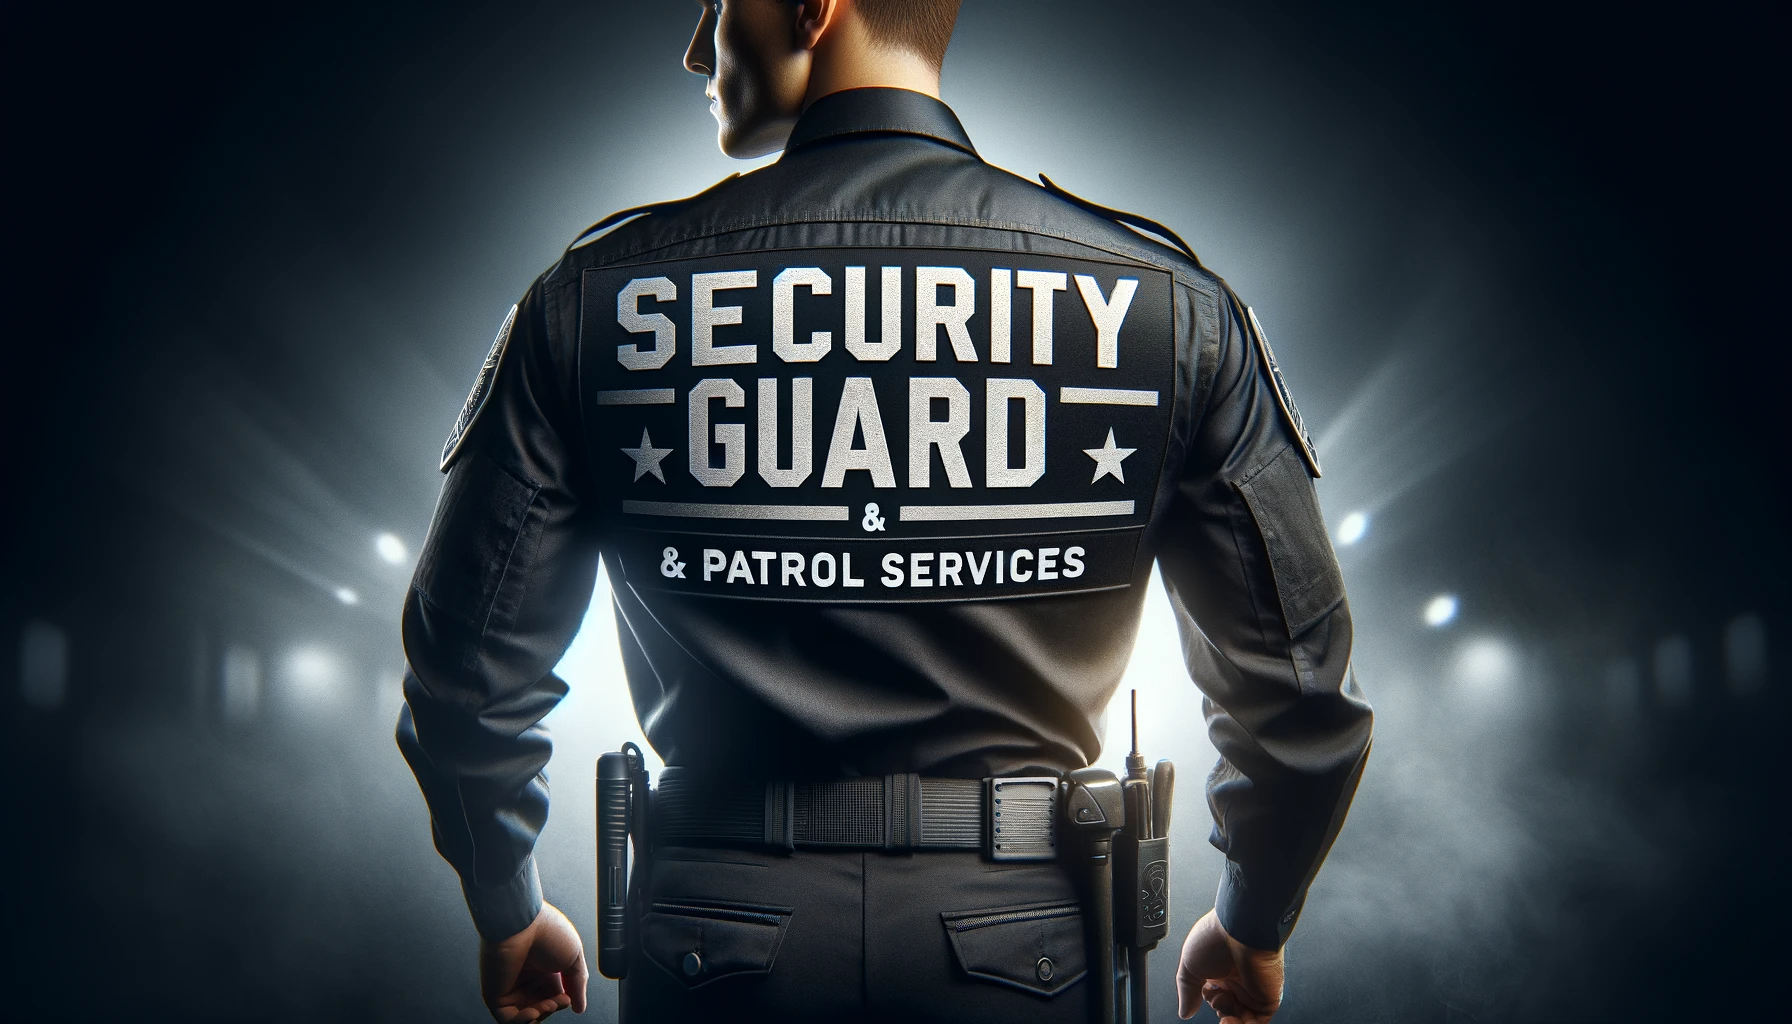 Ensuring Safety and Serenity: Downtown Los Angeles Security Guard Services by First Choice Security Guard & Patrol Services